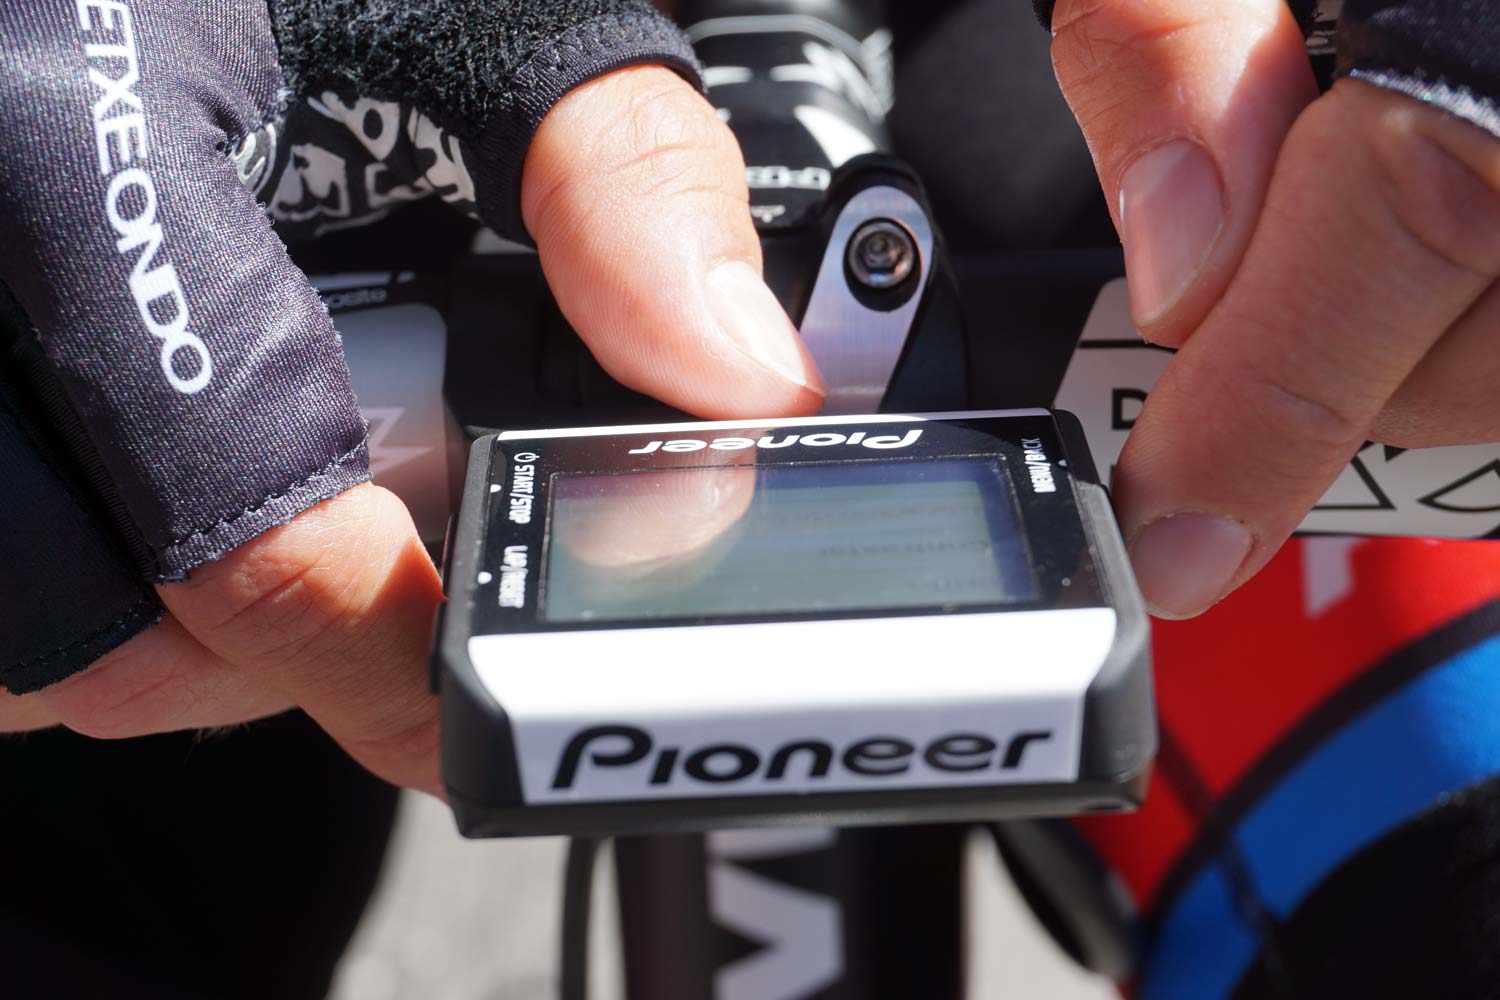 Simon Geschke adjusts his Pioneer power meter before a stage of the 2015 Tour Down Under.